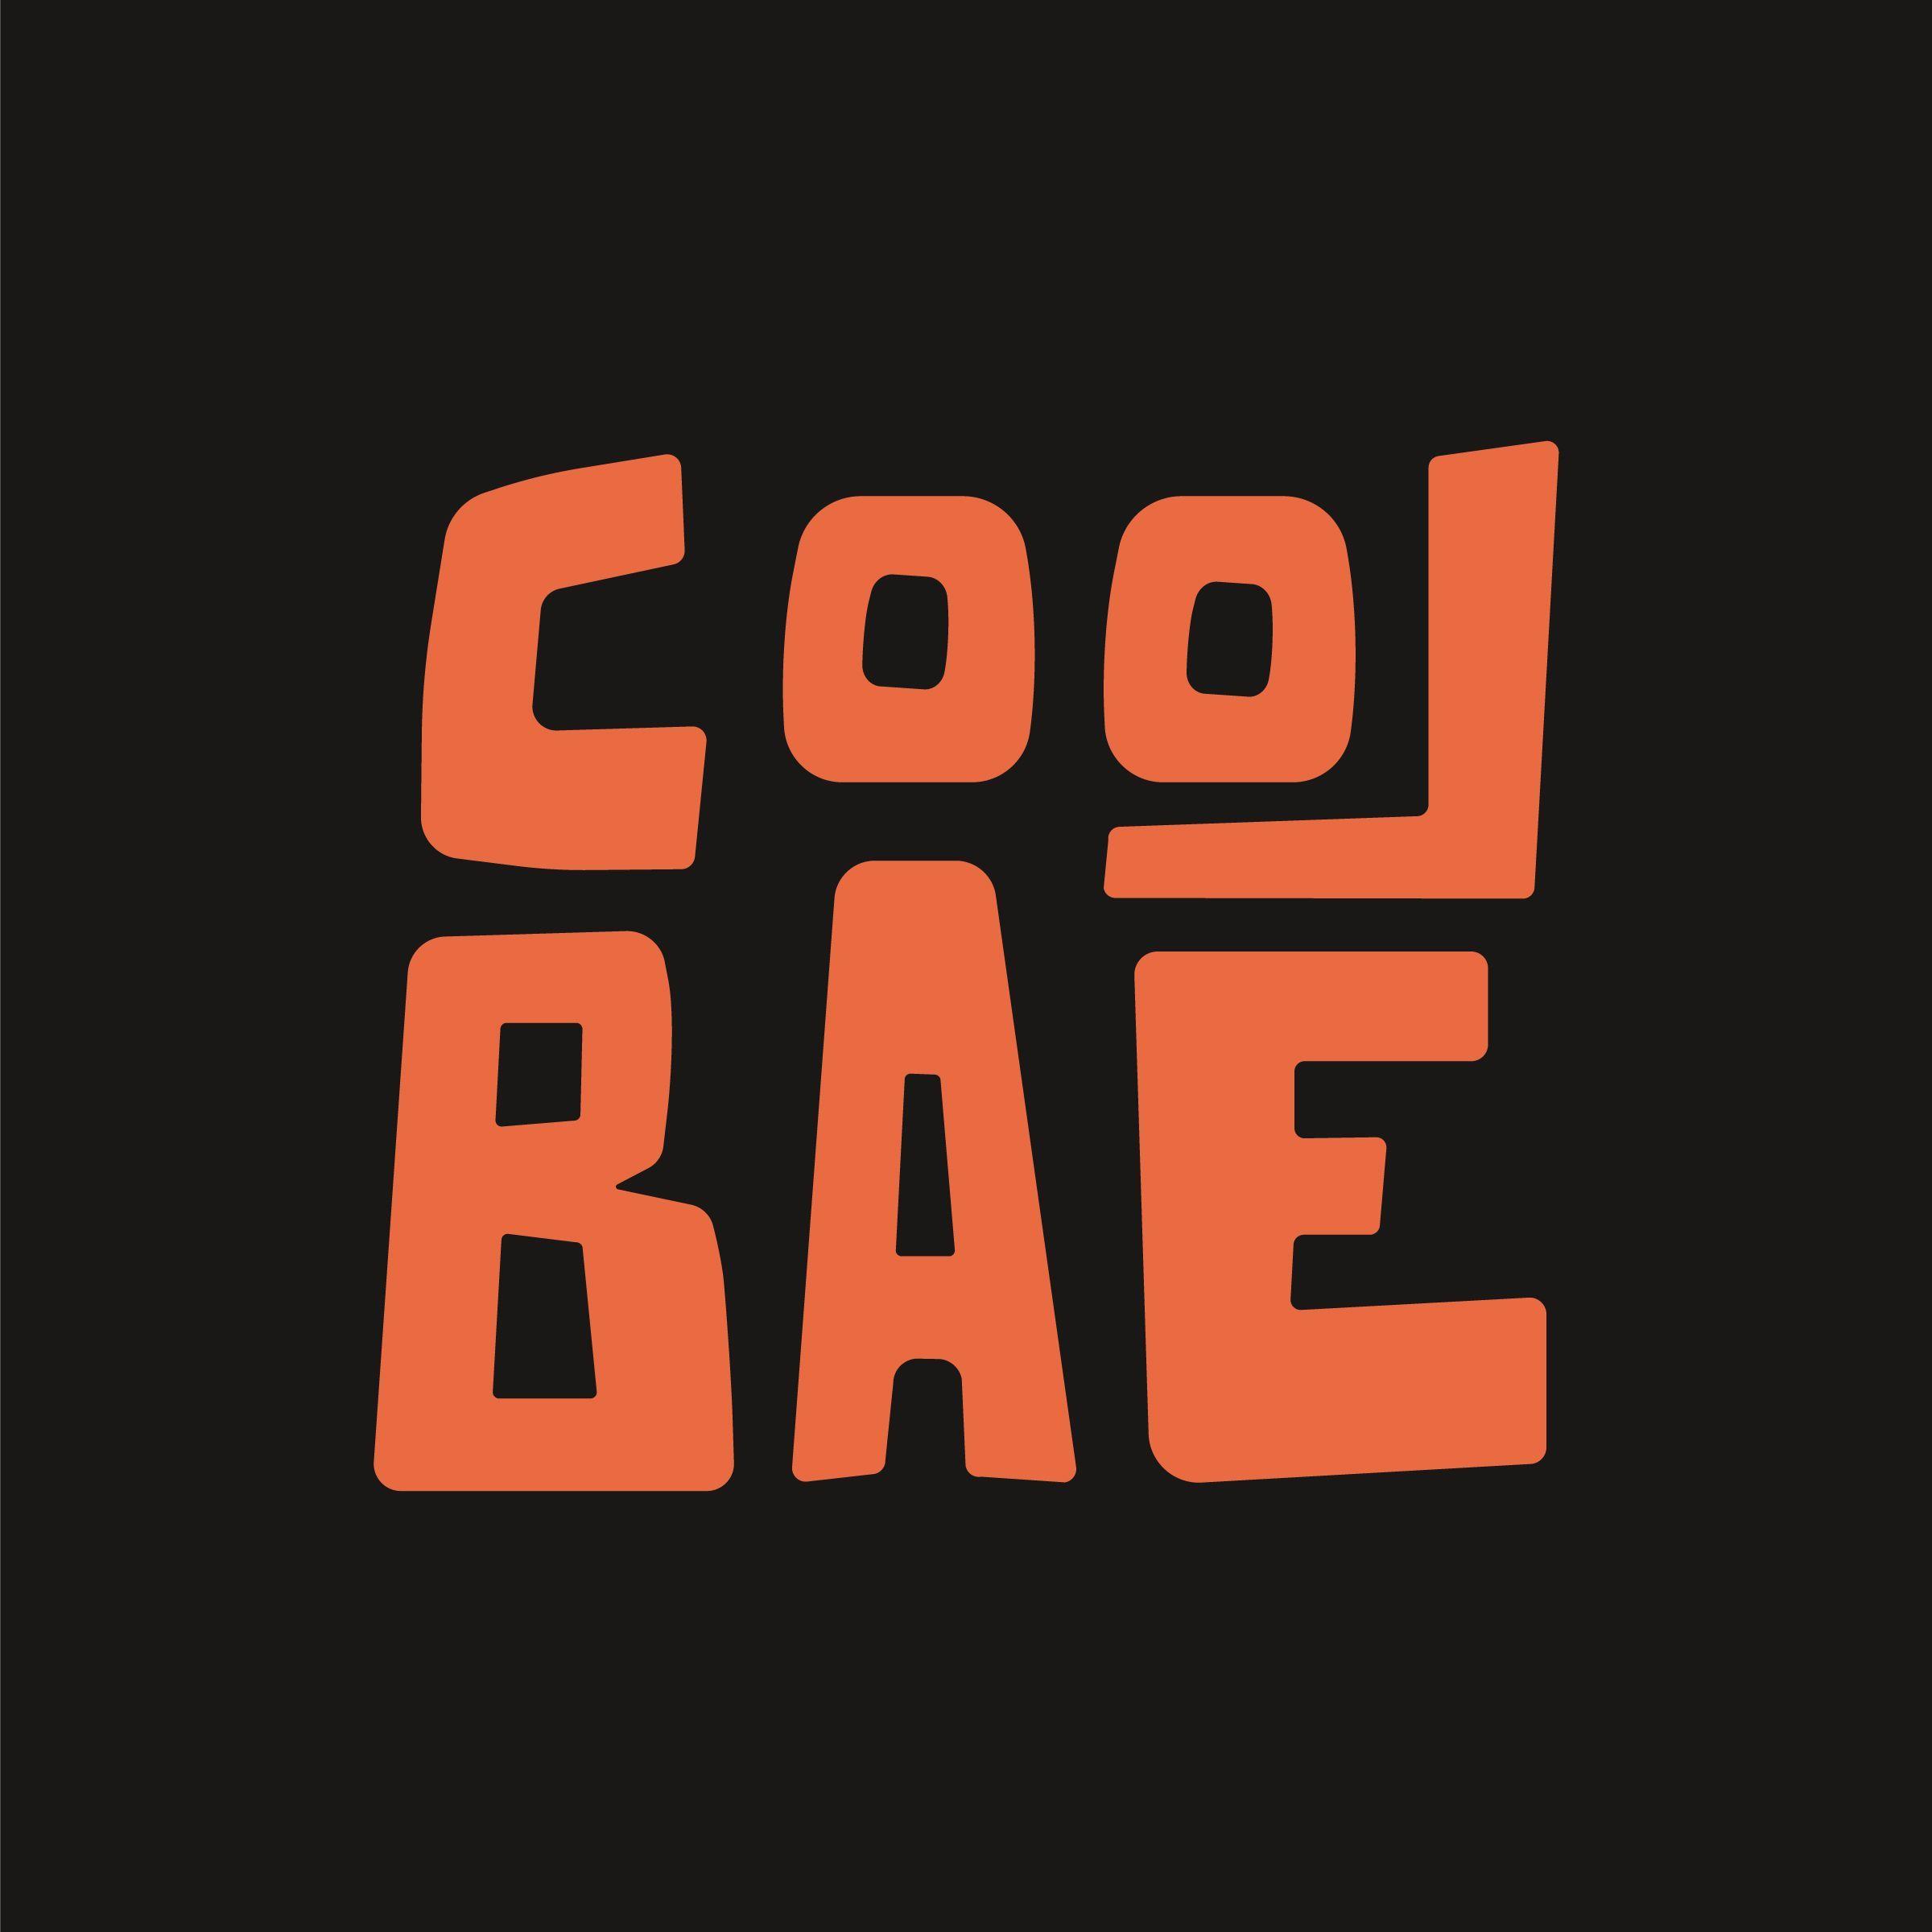 Player coolbae avatar